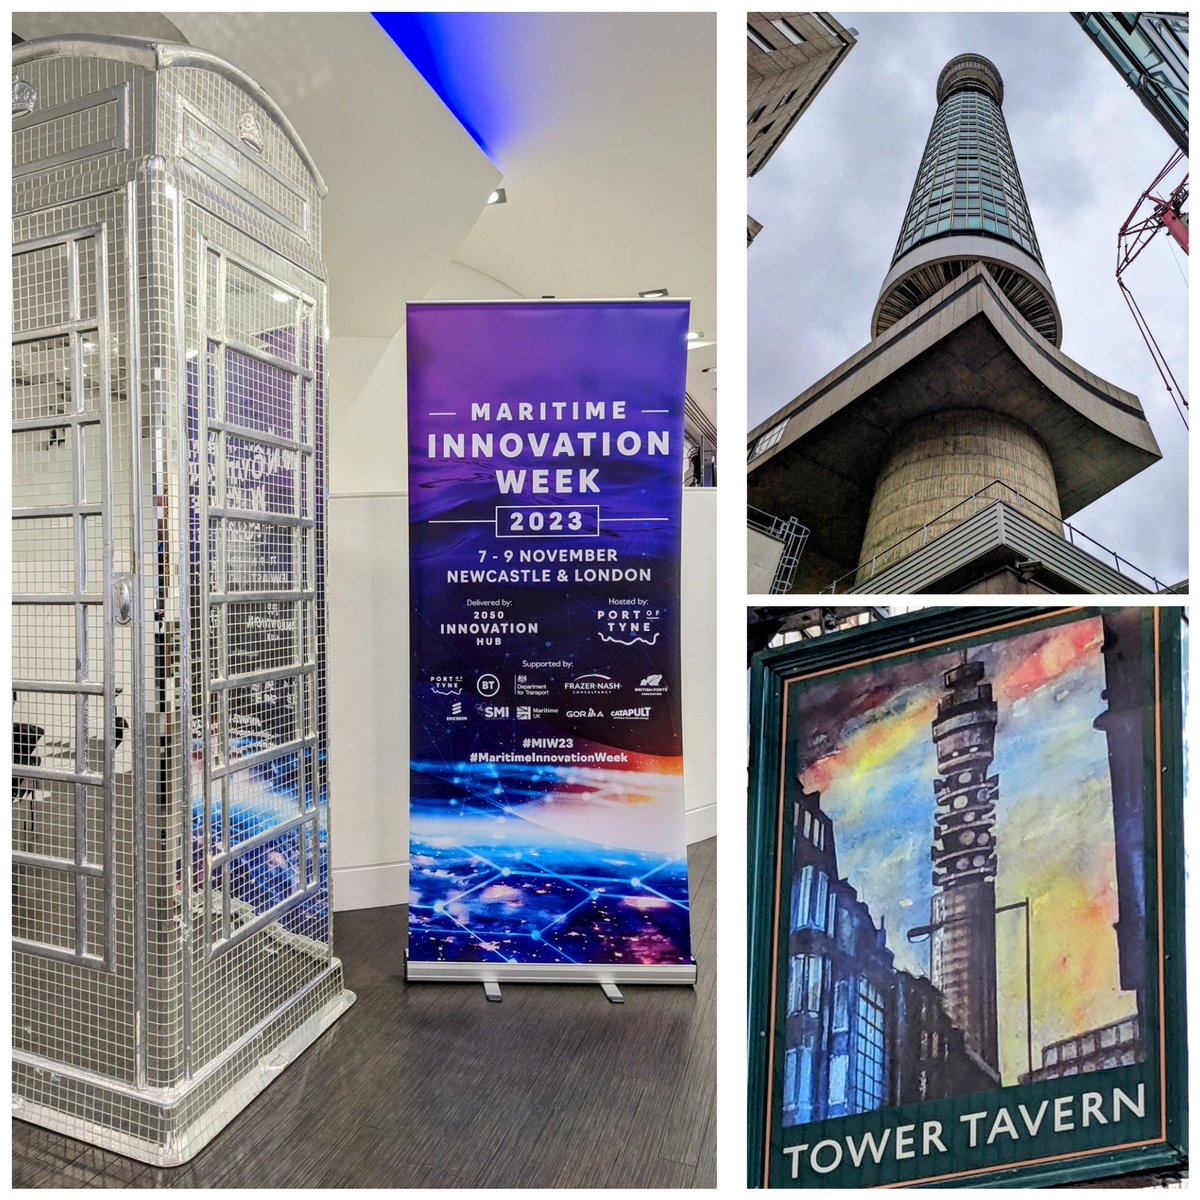 At the iconic @bttowerlondon to speak at #MIW23 #MaritimeInnovationWeek - looking forward to sharing some thoughts on the future of 5G, WiFi and Satellite Communications... #SmartPorts #IoT #DigitalTransformation